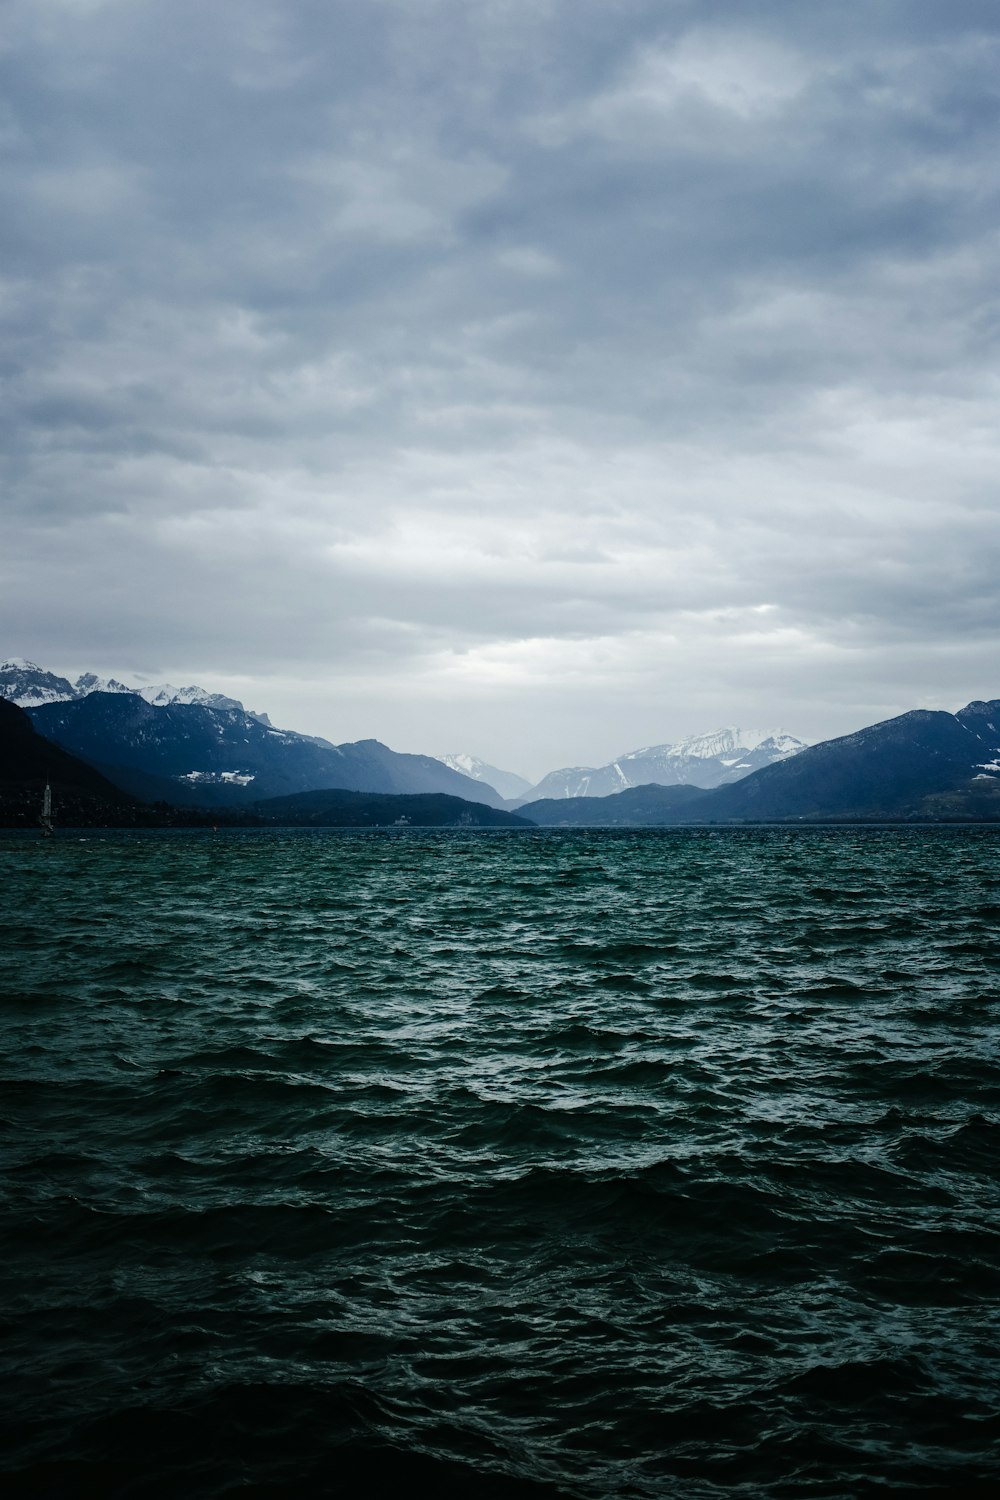 body of water near mountains under cloudy sky during daytime